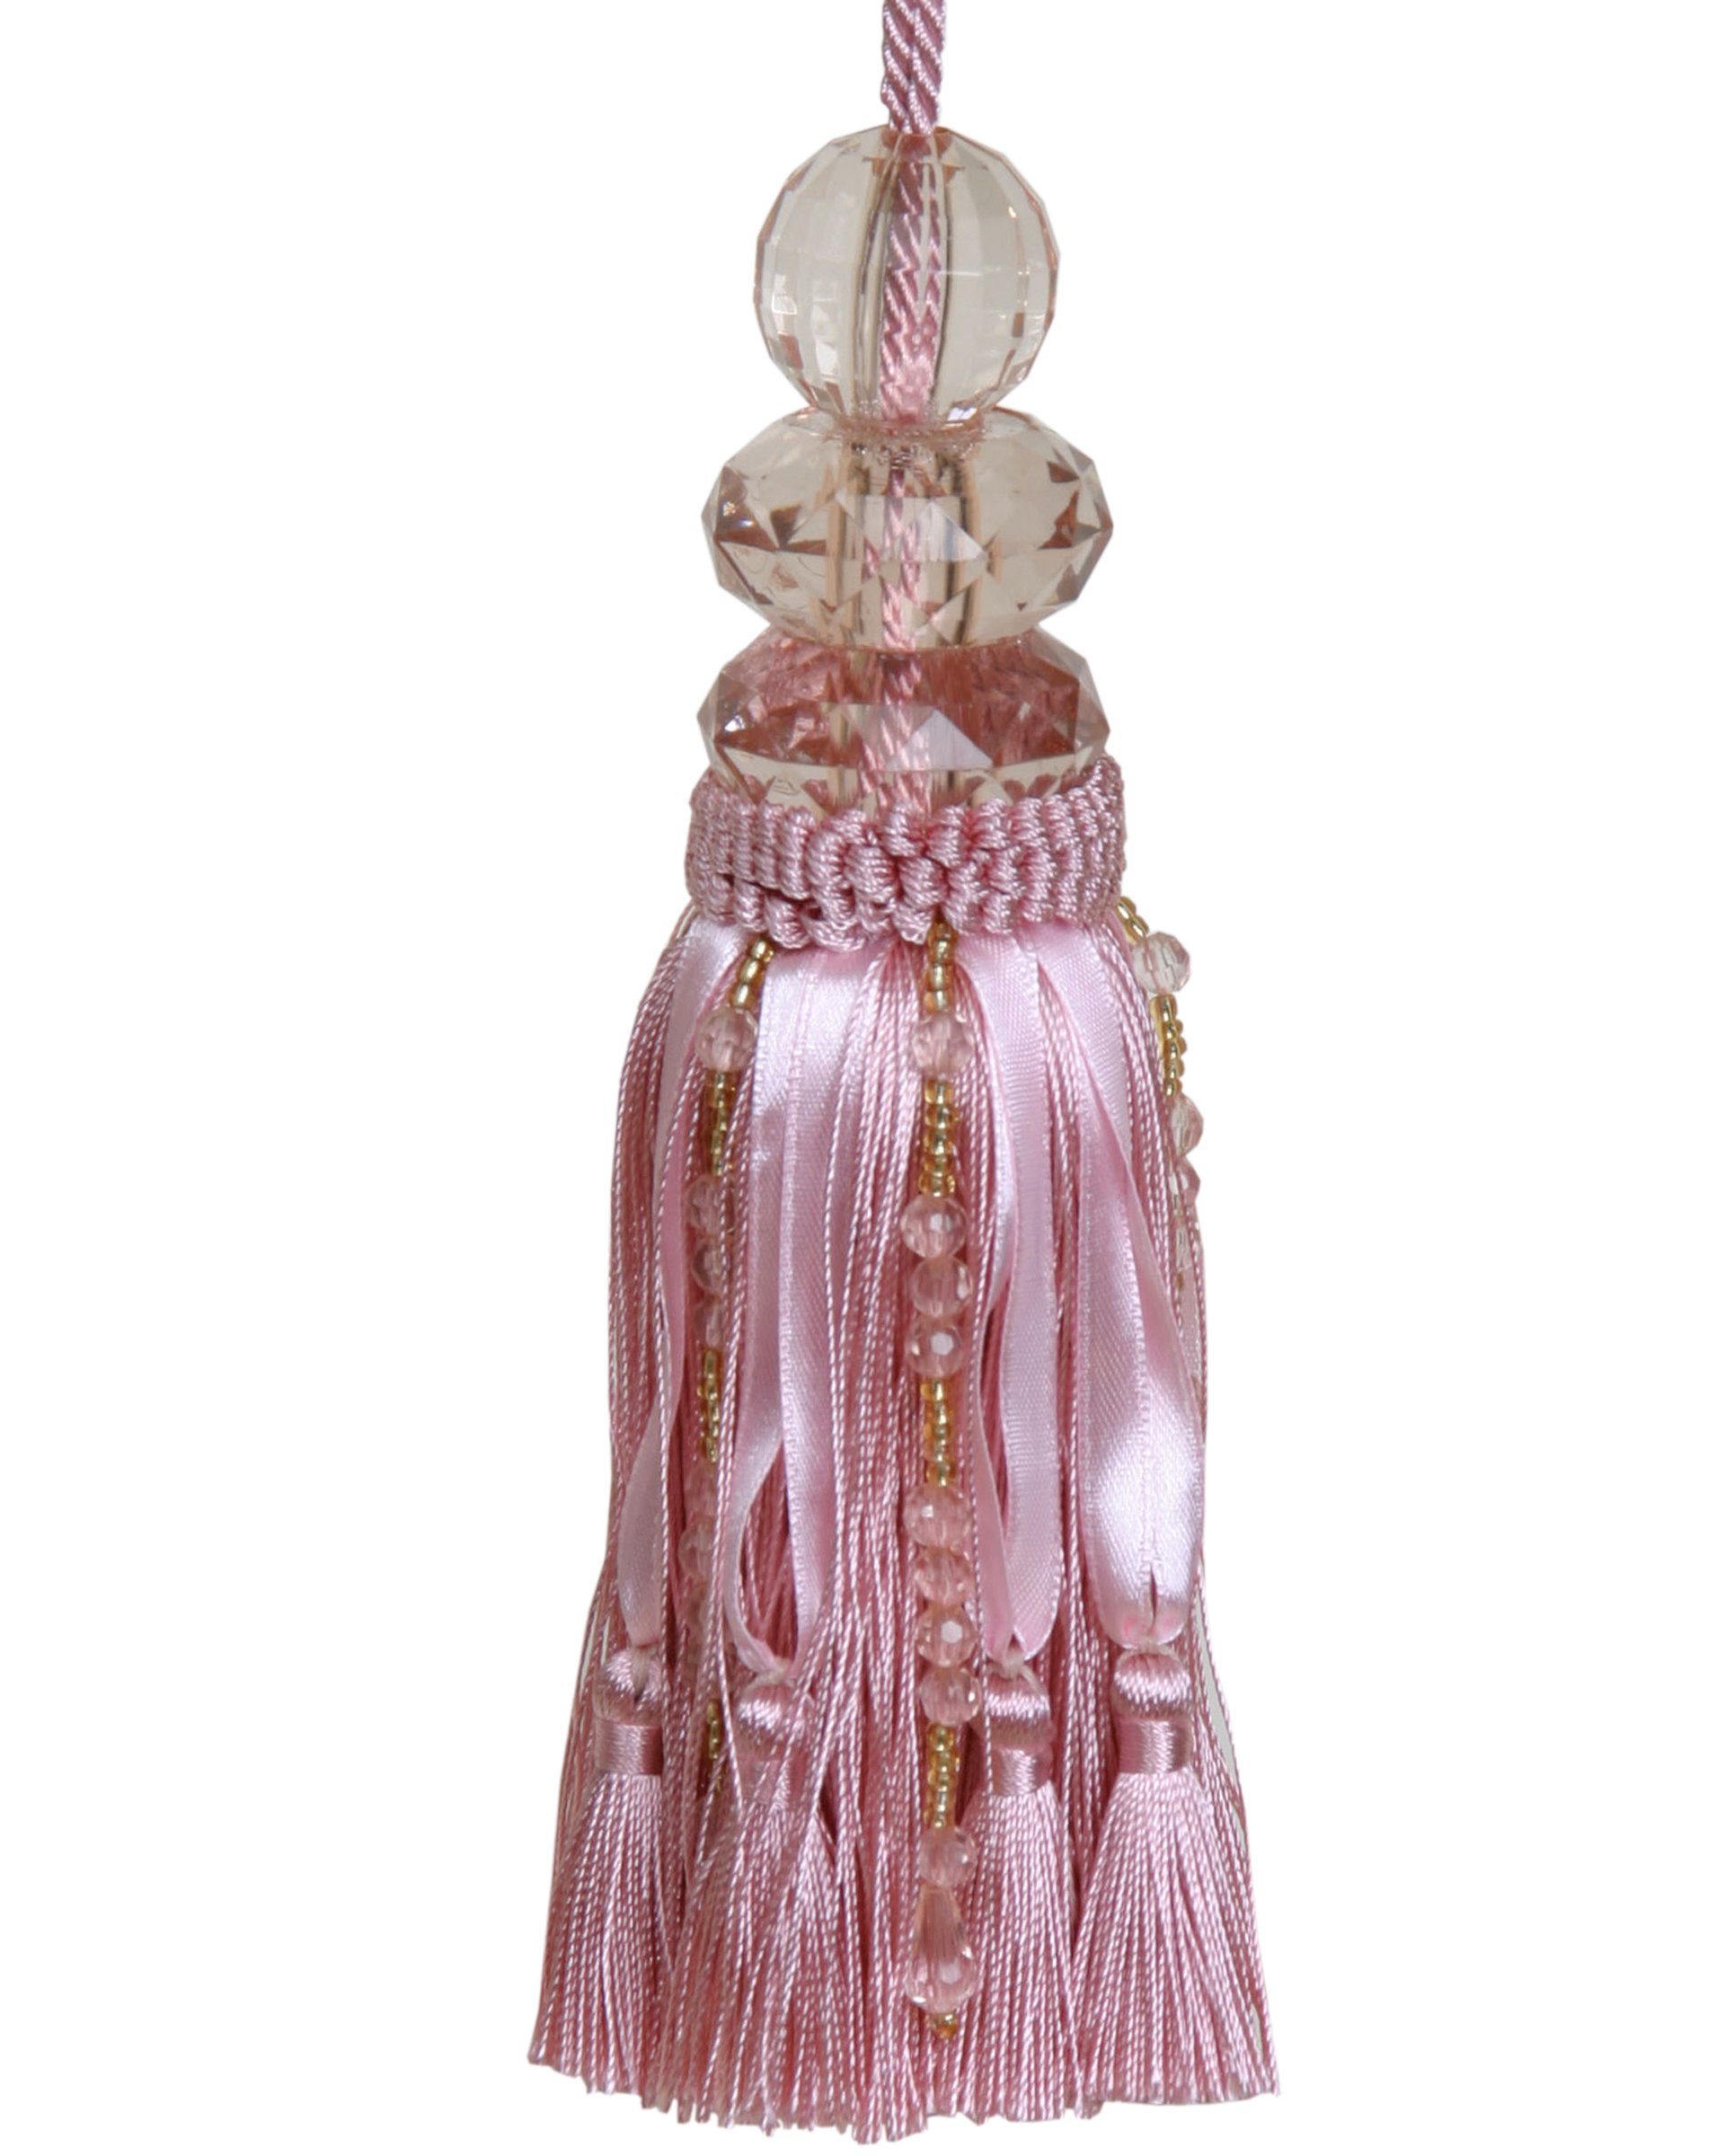 Large Tassel with Double Beaded Top and ribbons - Pink 17cm